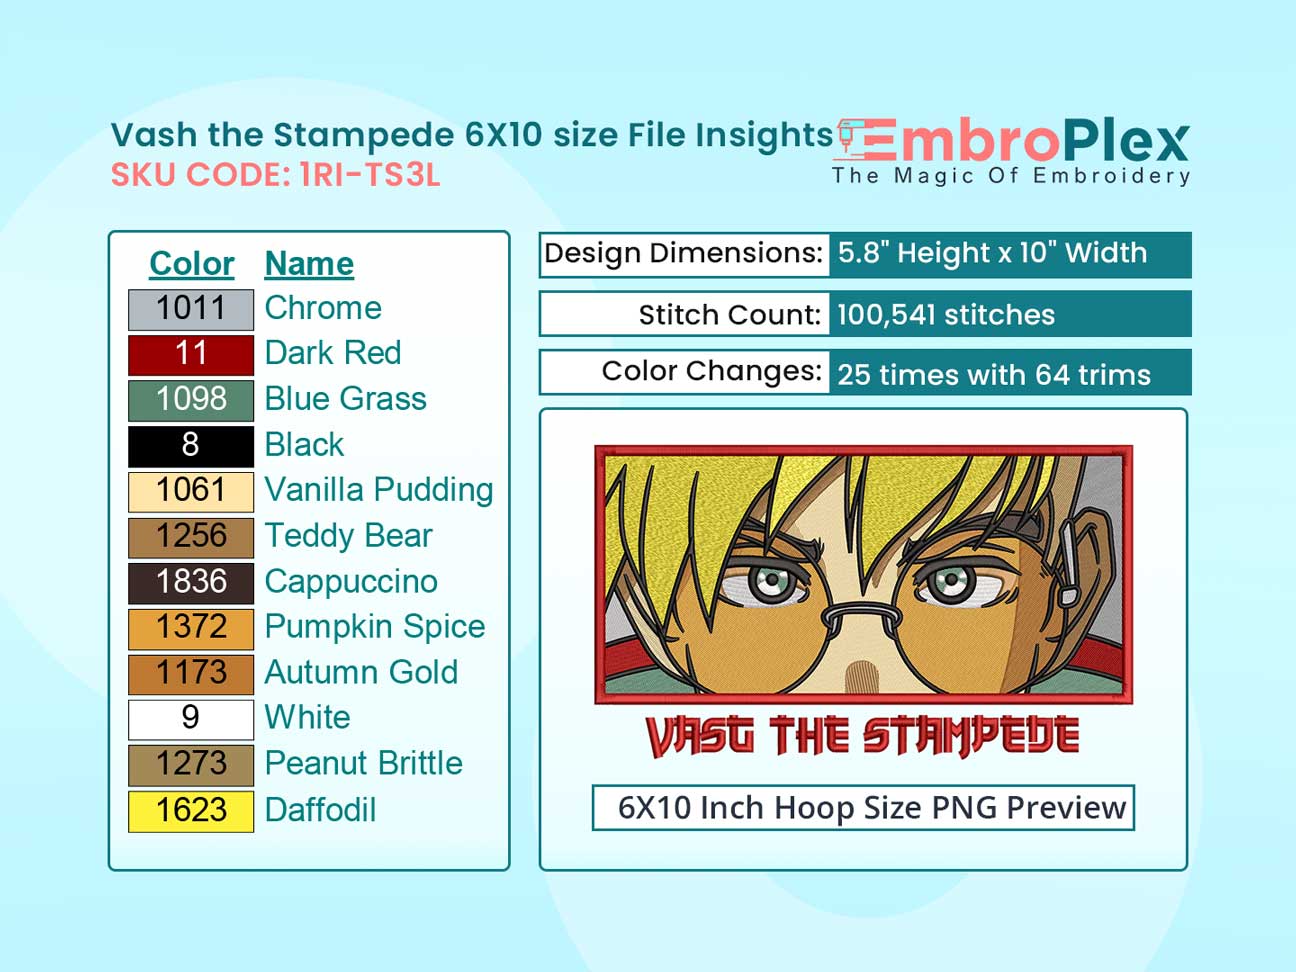 Anime-Inspired Vash the Stampede Embroidery Design File - 6x10 Inch hoop Size Variation overview image